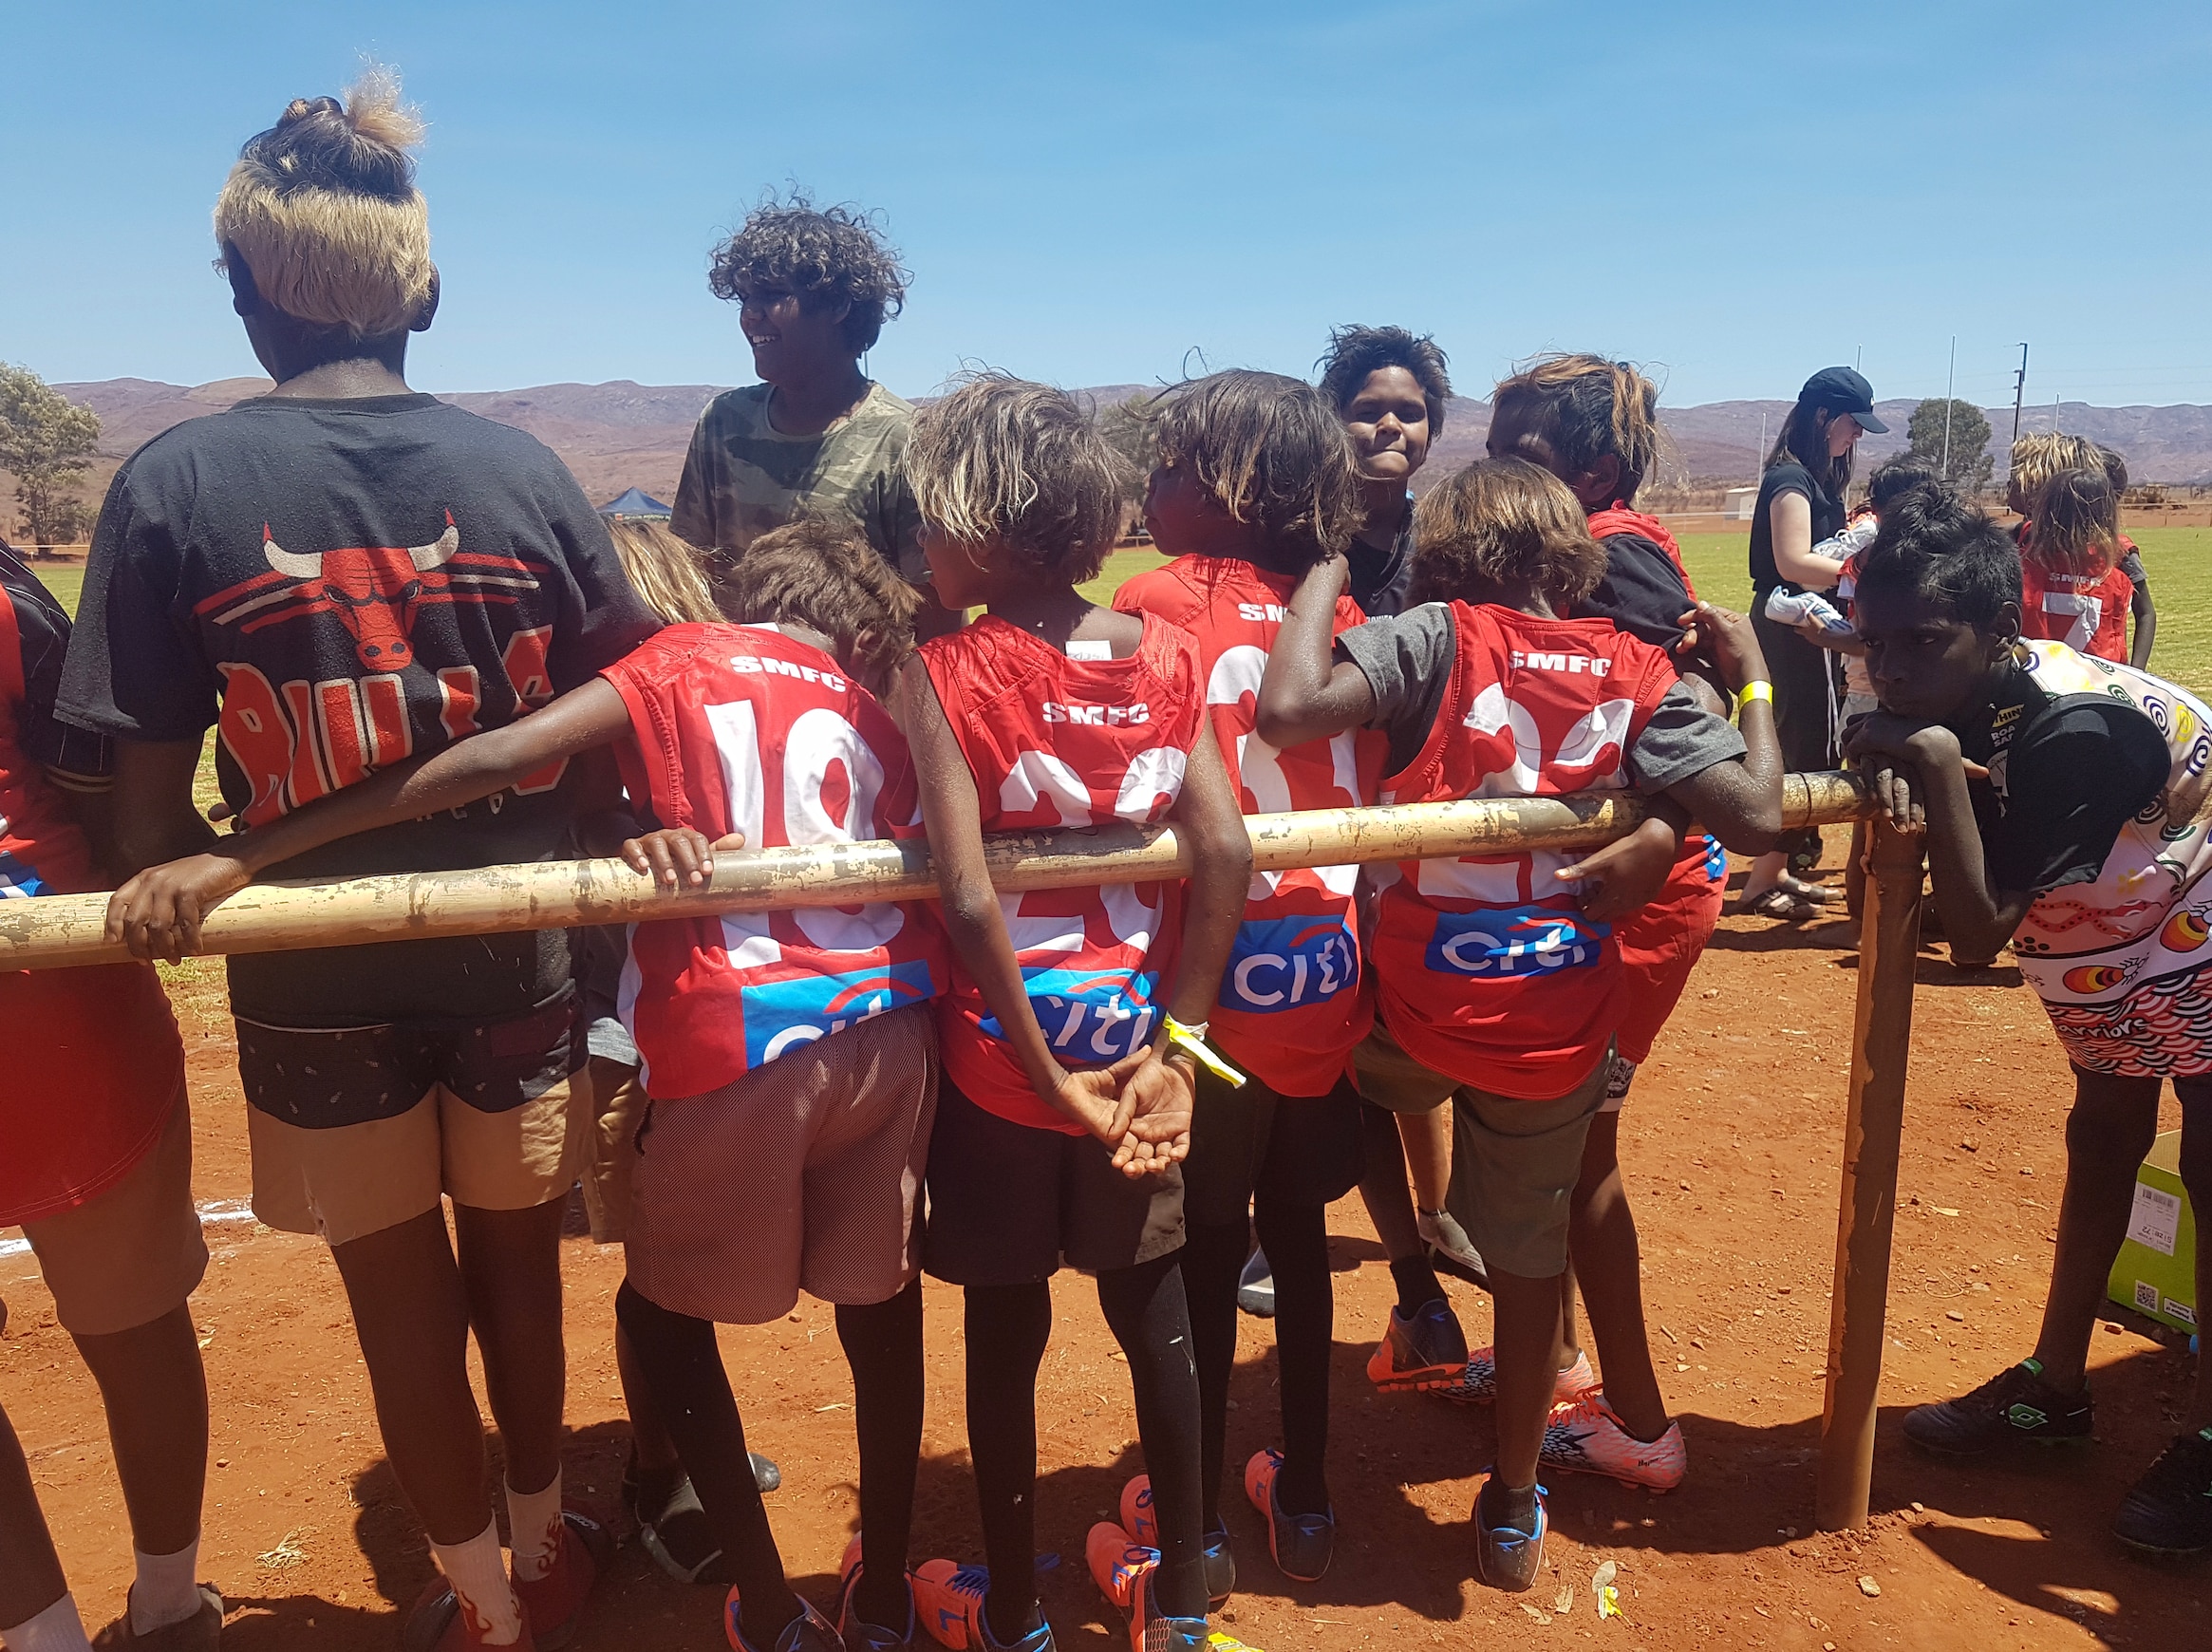 Some young kids of the APY Lands say they have never seen a grass oval before.